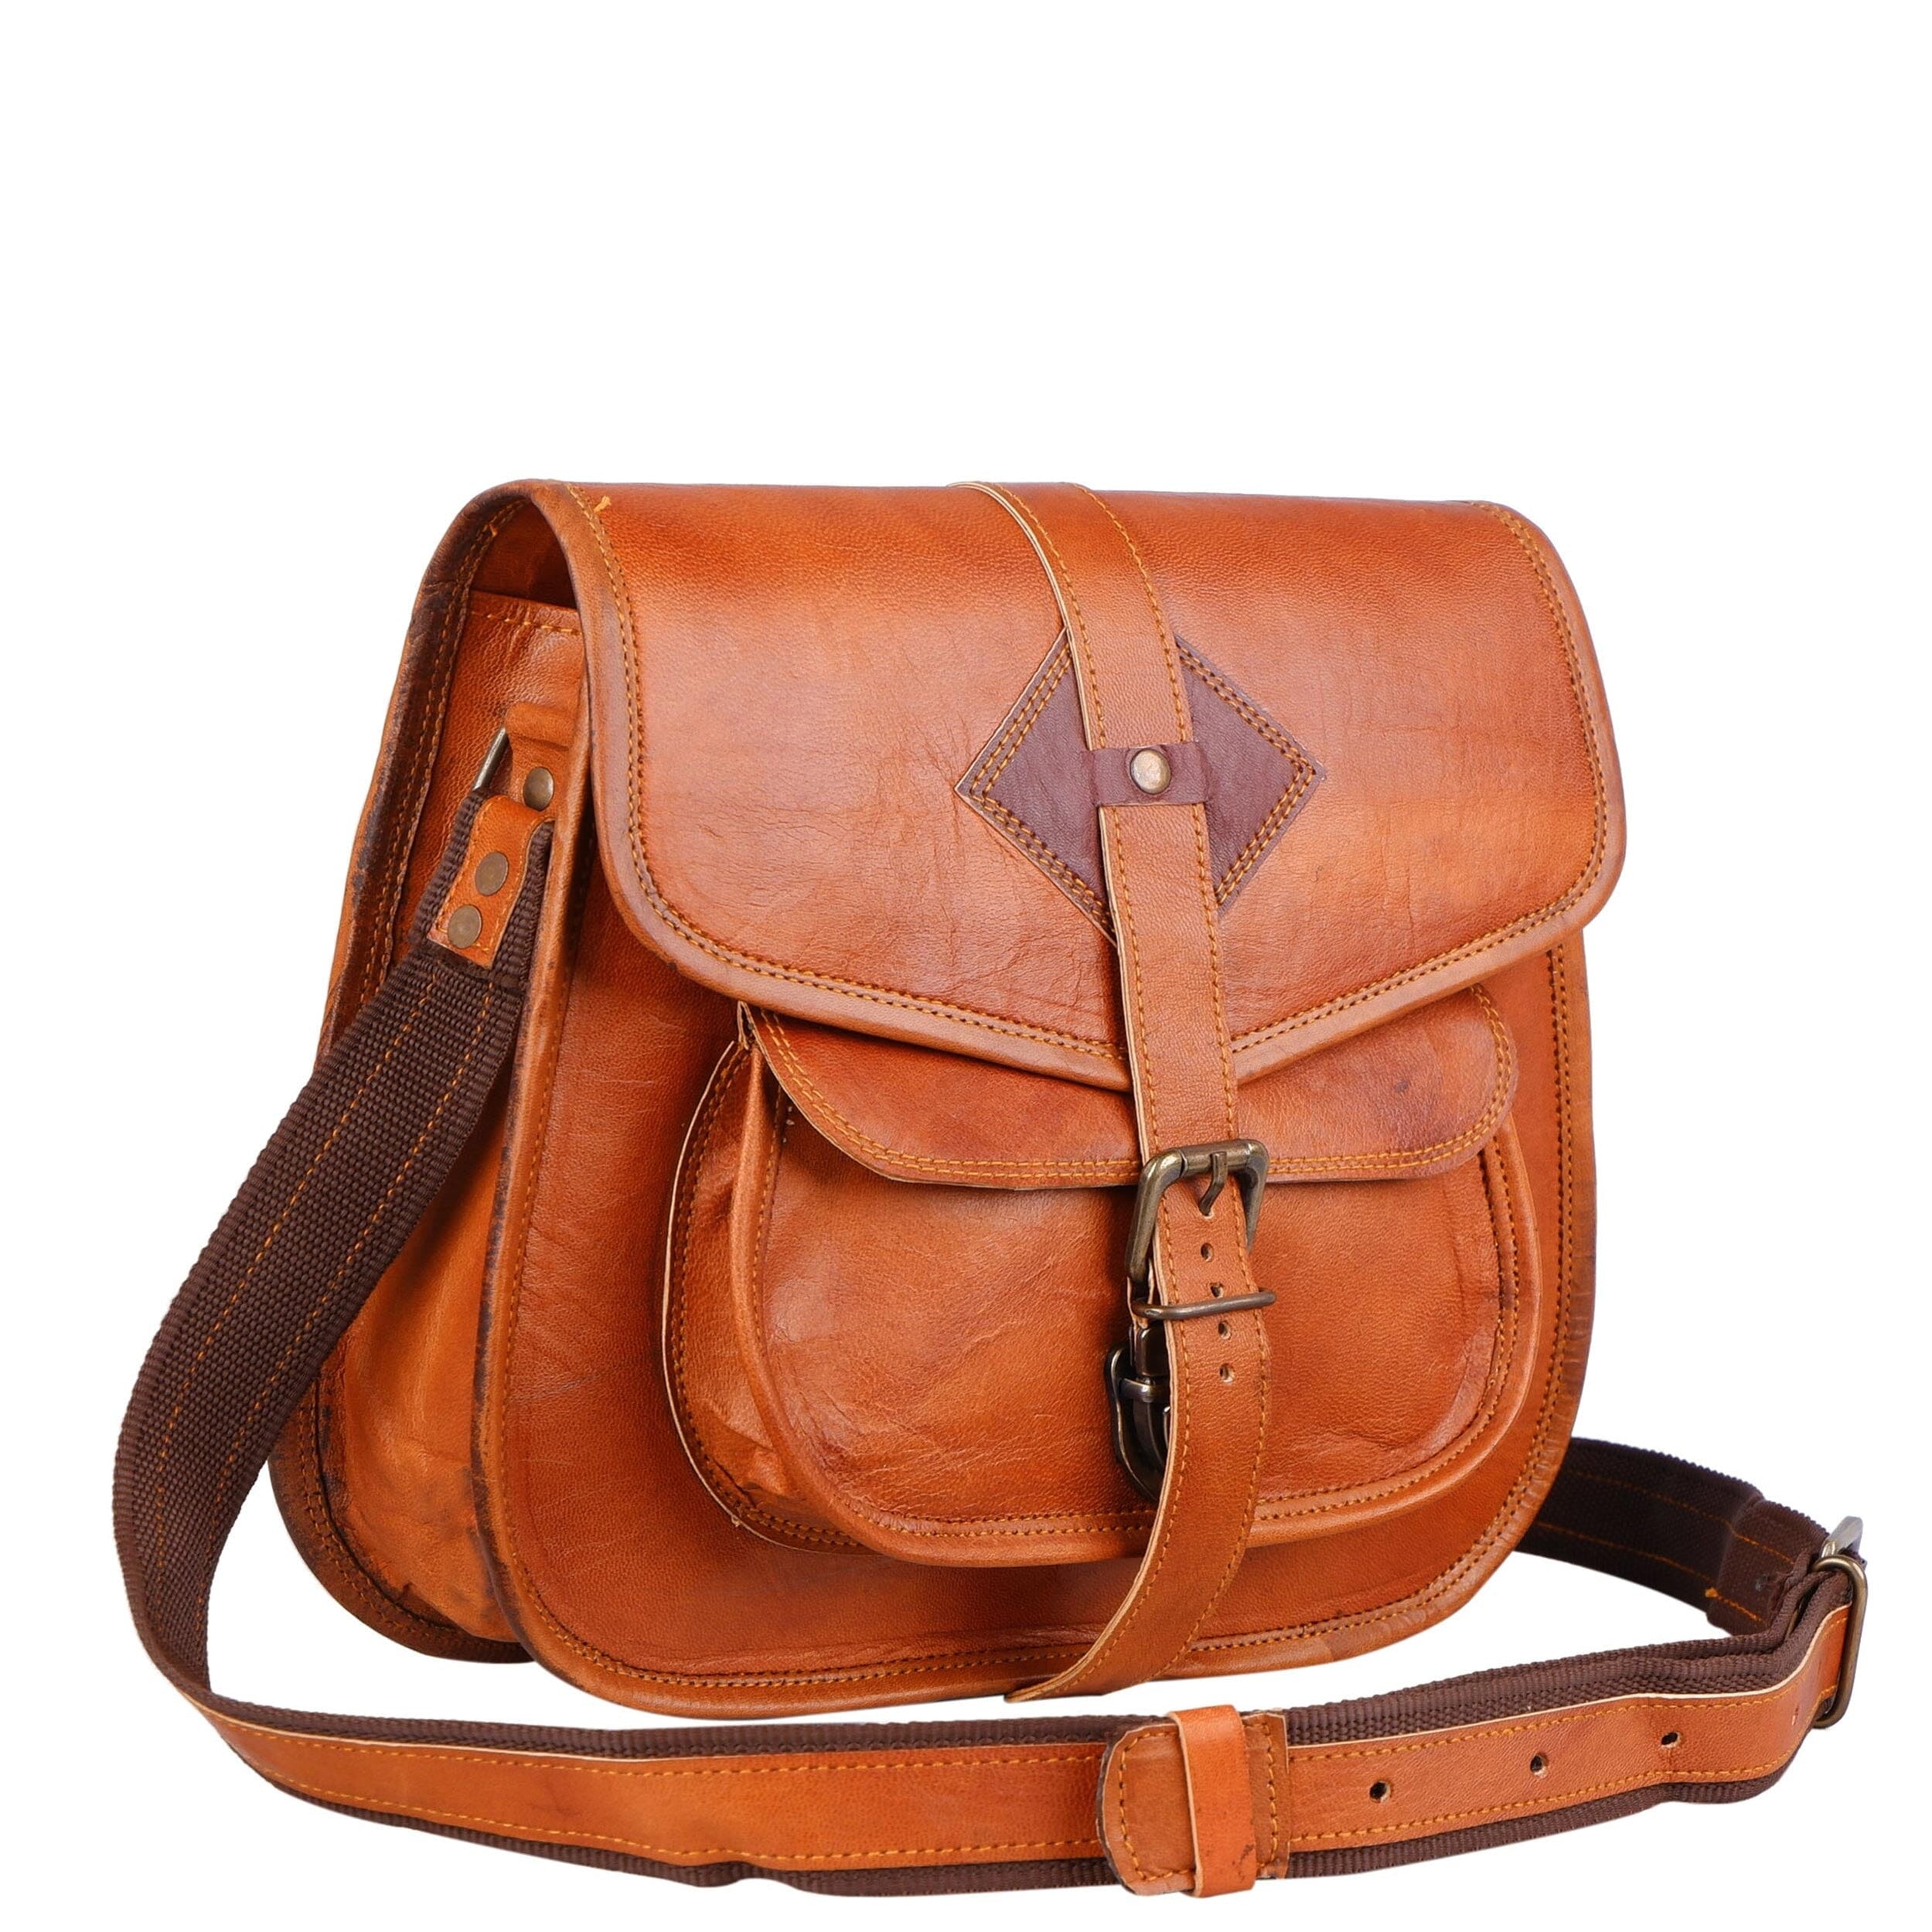 Buy Leather Crossbody Purse Brown Sling Bag for Women — Classy Leather Bags